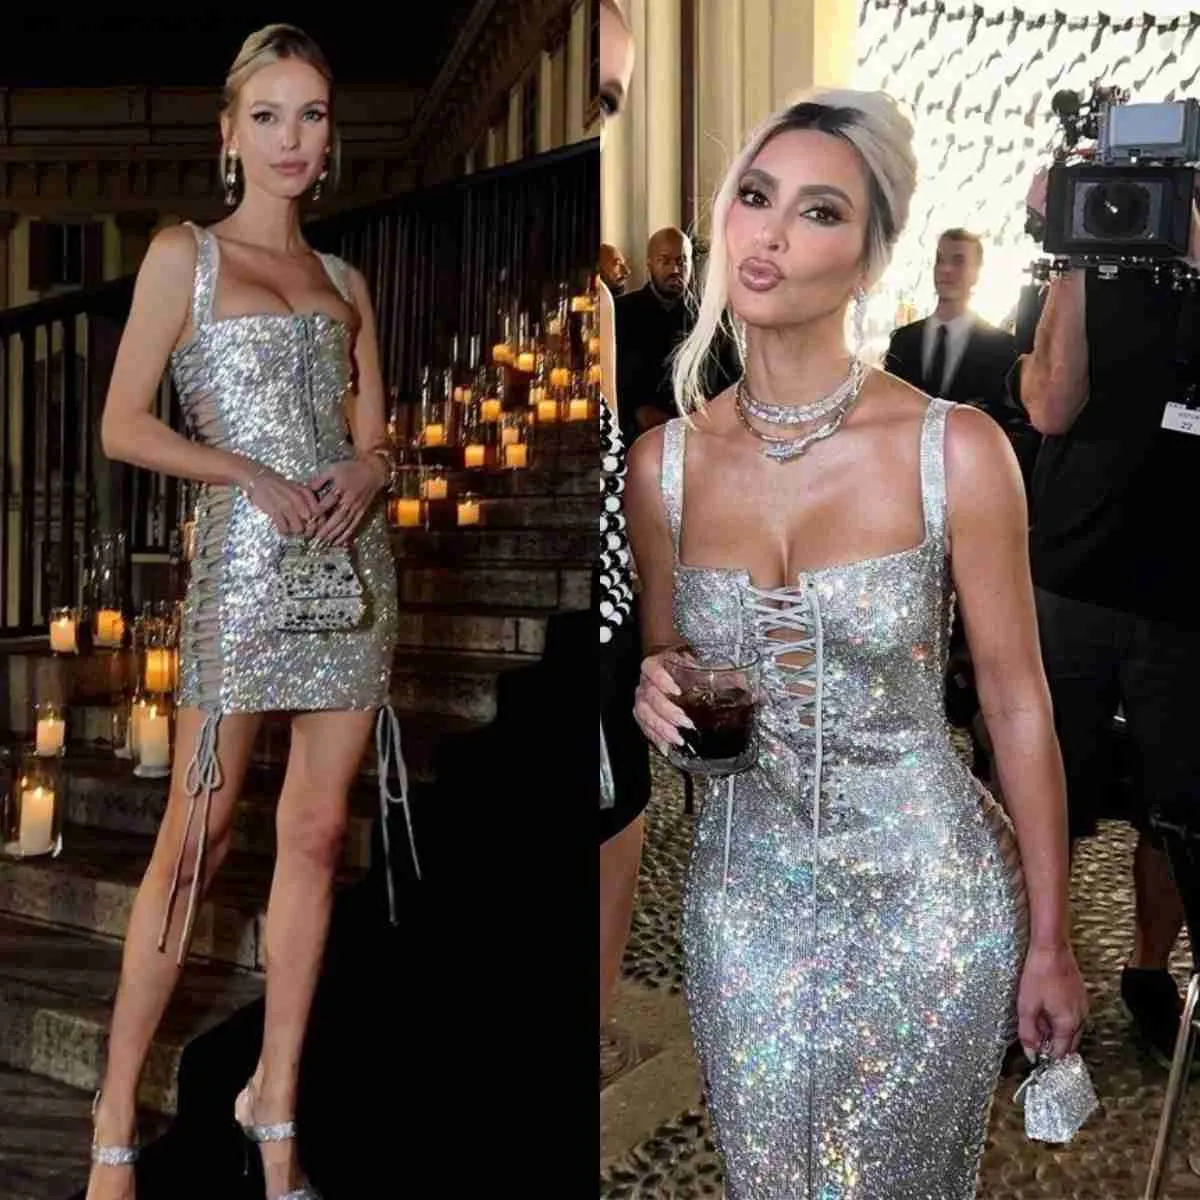 Urban Sexy Dresses Shiny Crystals Evening Dress Sexy Strap Ties Lace Up Formal Short Mini Red Carpet Prom Party Dress Ins Hot Girl Strtwear T240330